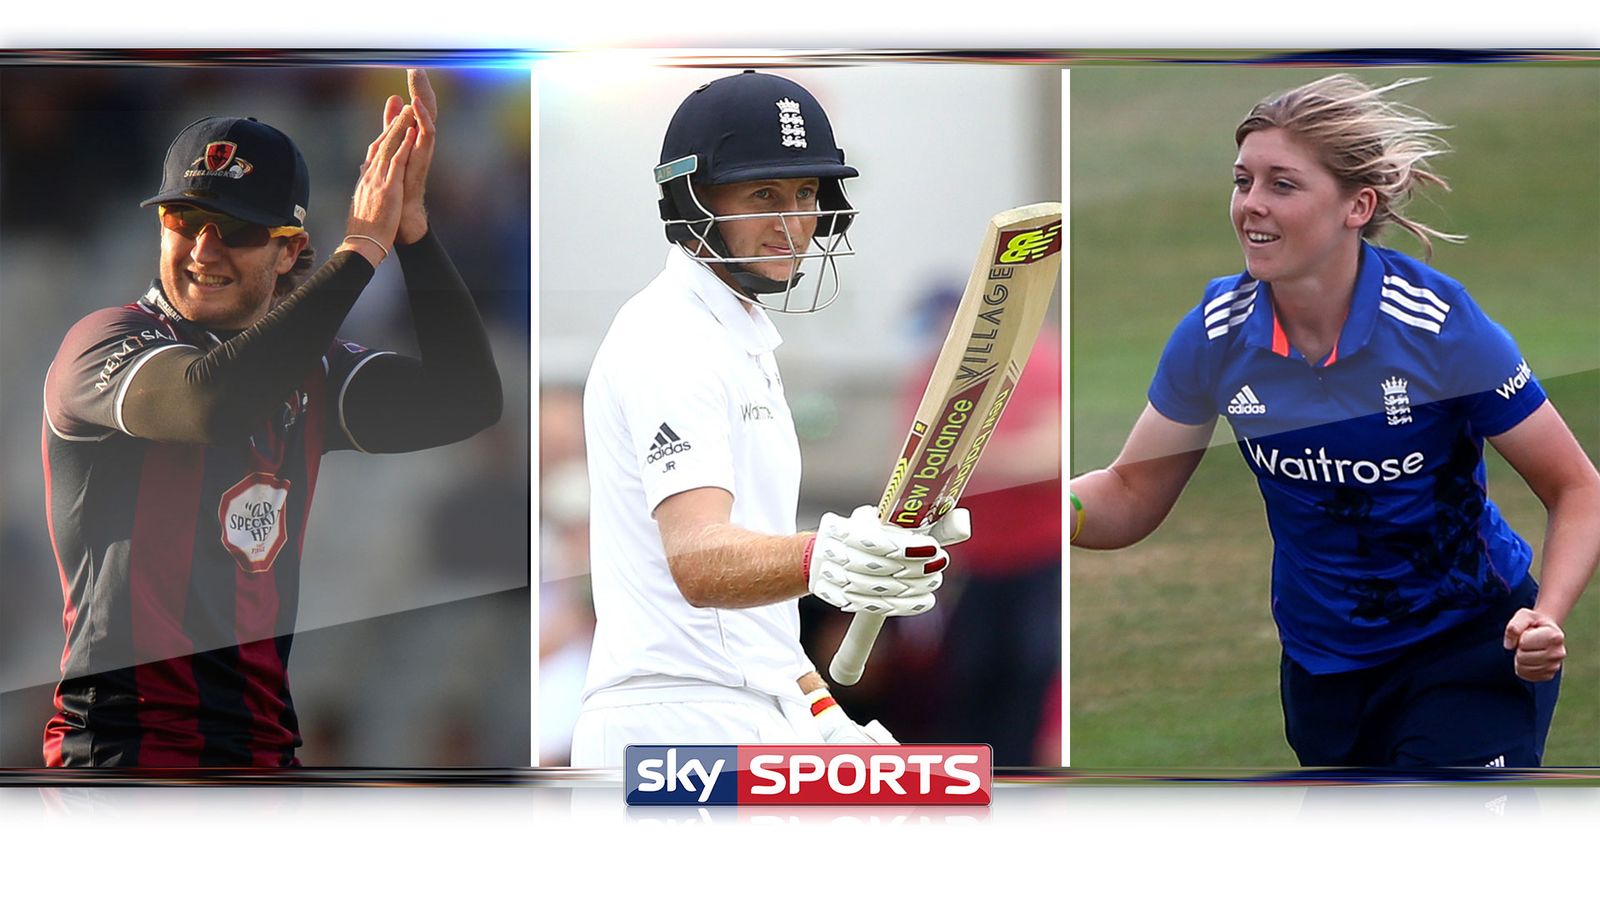 Sky Sports To Broadcast More Hours Of Cricket Than Ever Before This